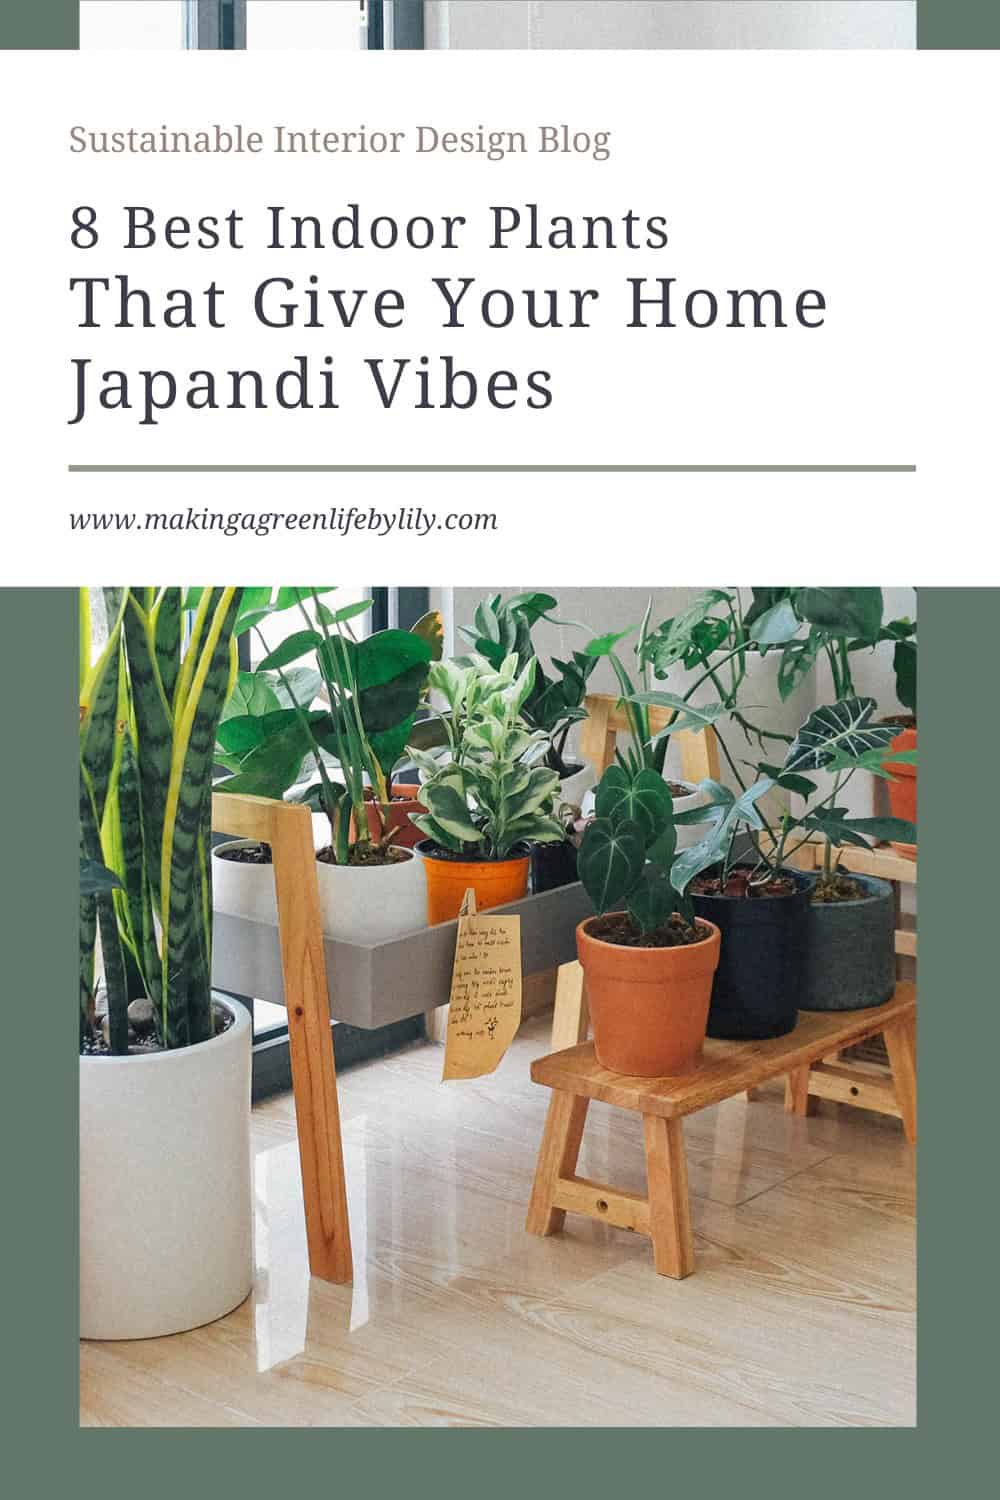 8 Best Indoor Plants That Give Your Home Japandi Vibes